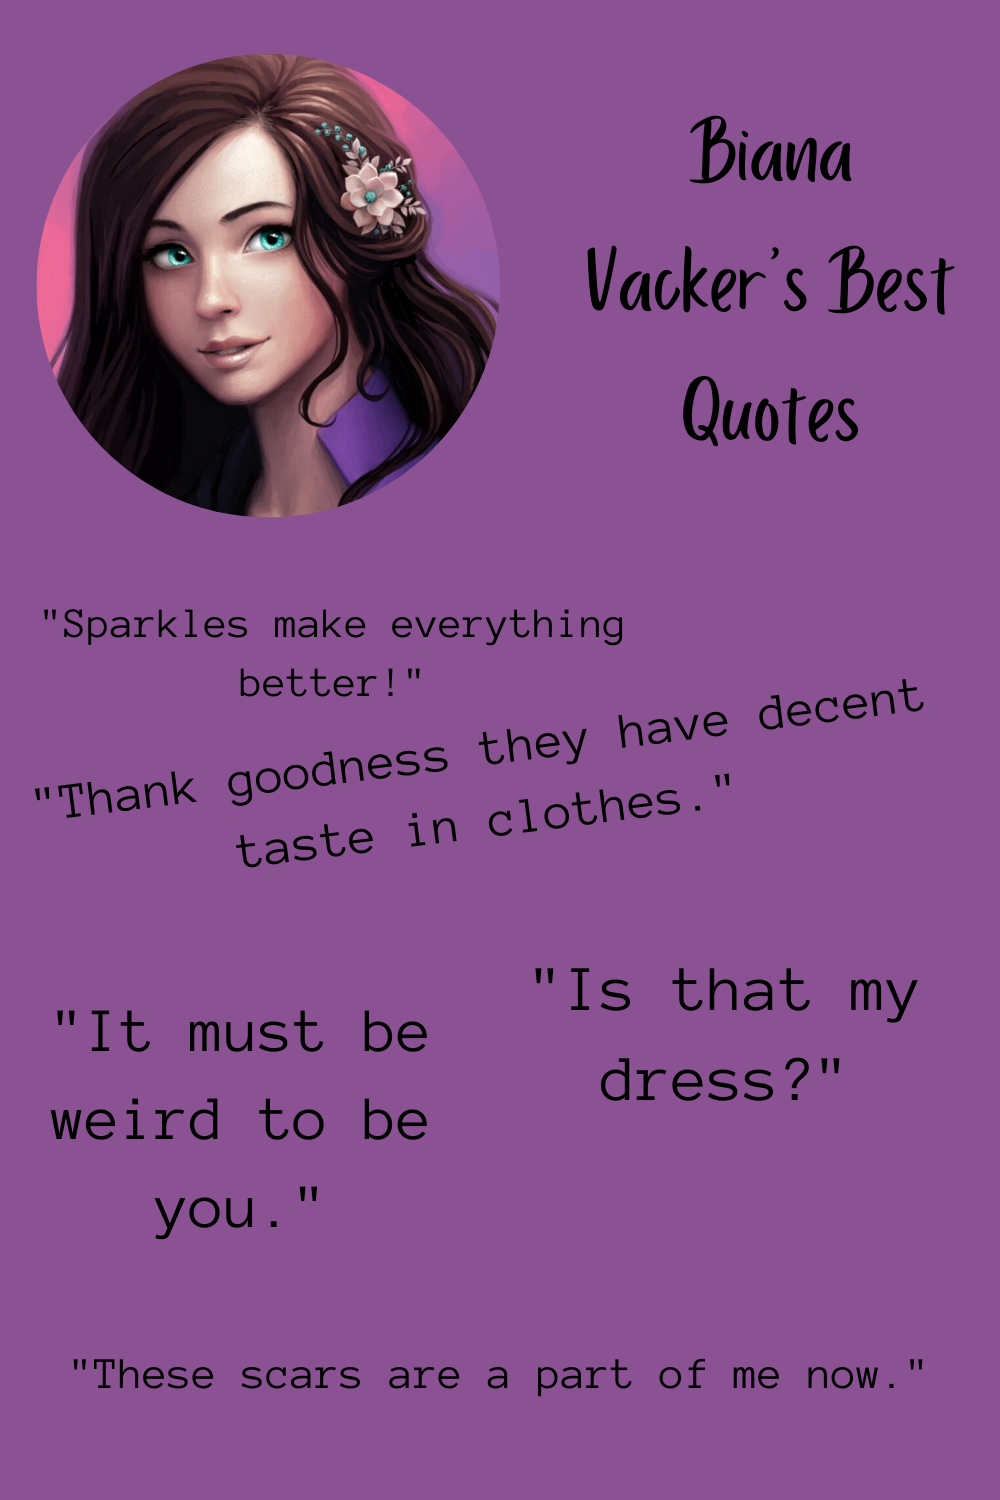 Biana Vacker Best Quotes. Lost city, Favorite book quotes, City quotes